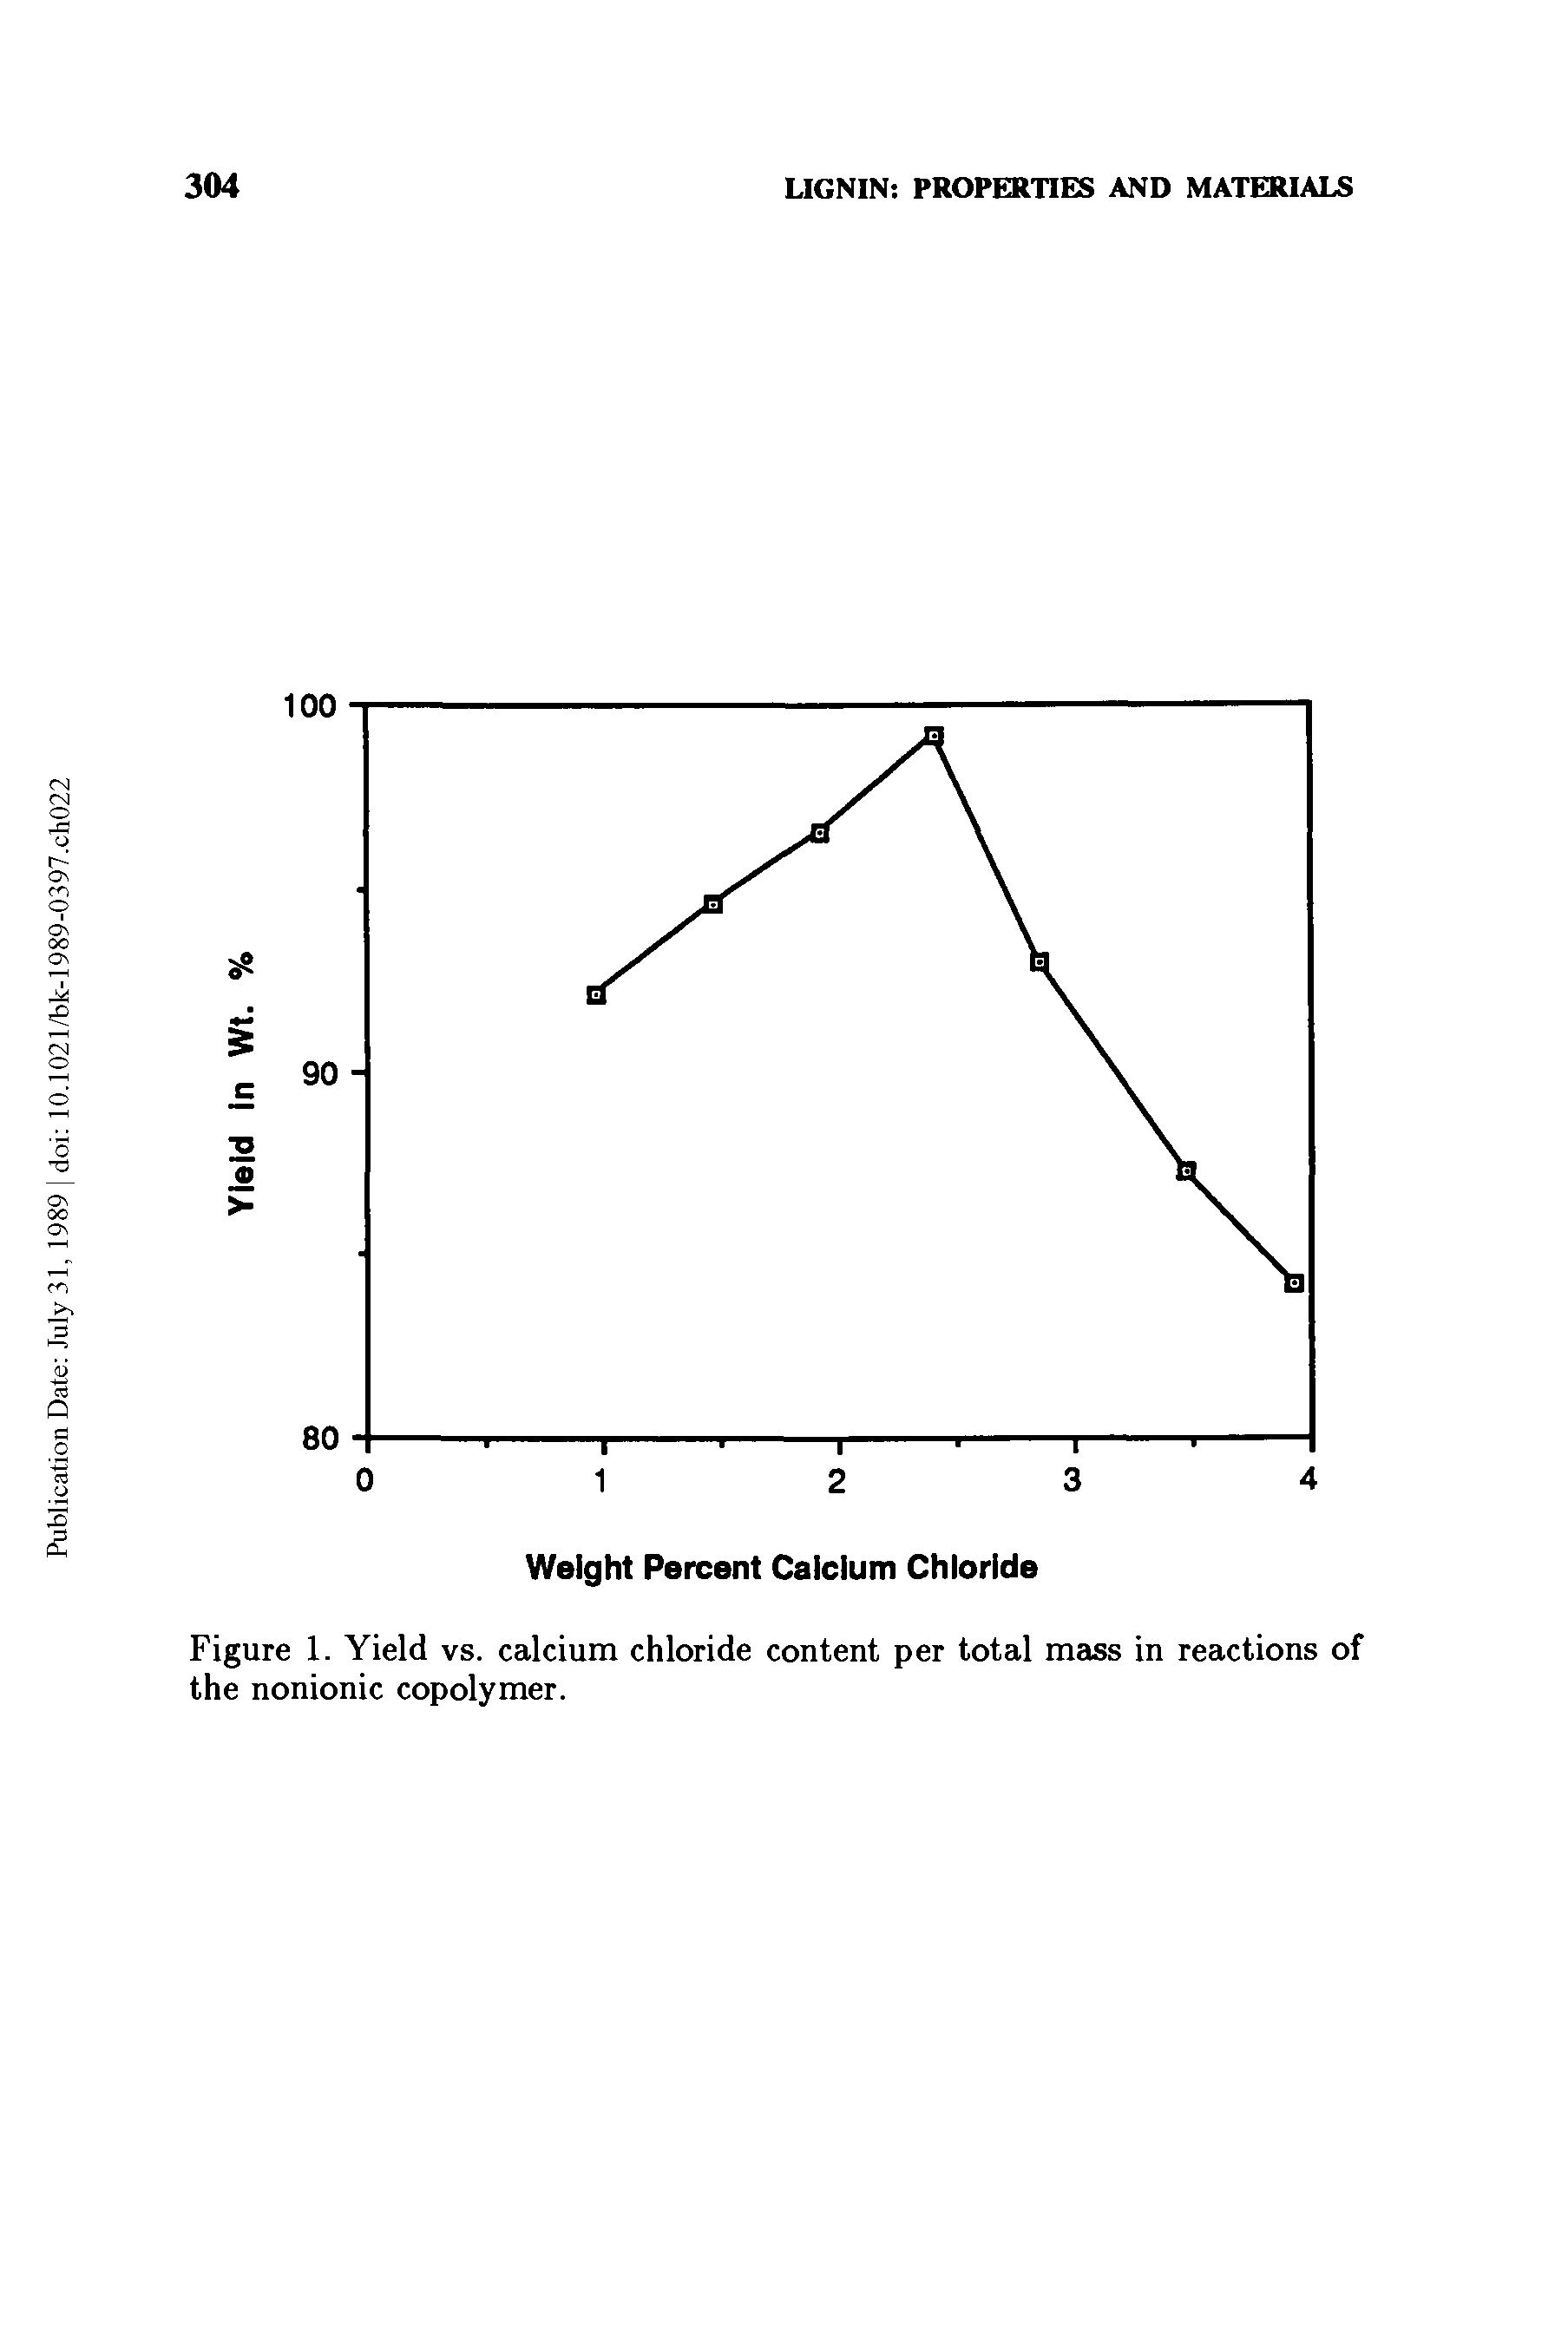 Figure 1. Yield vs. calcium chloride content per total mass in reactions of the nonionic copolymer.